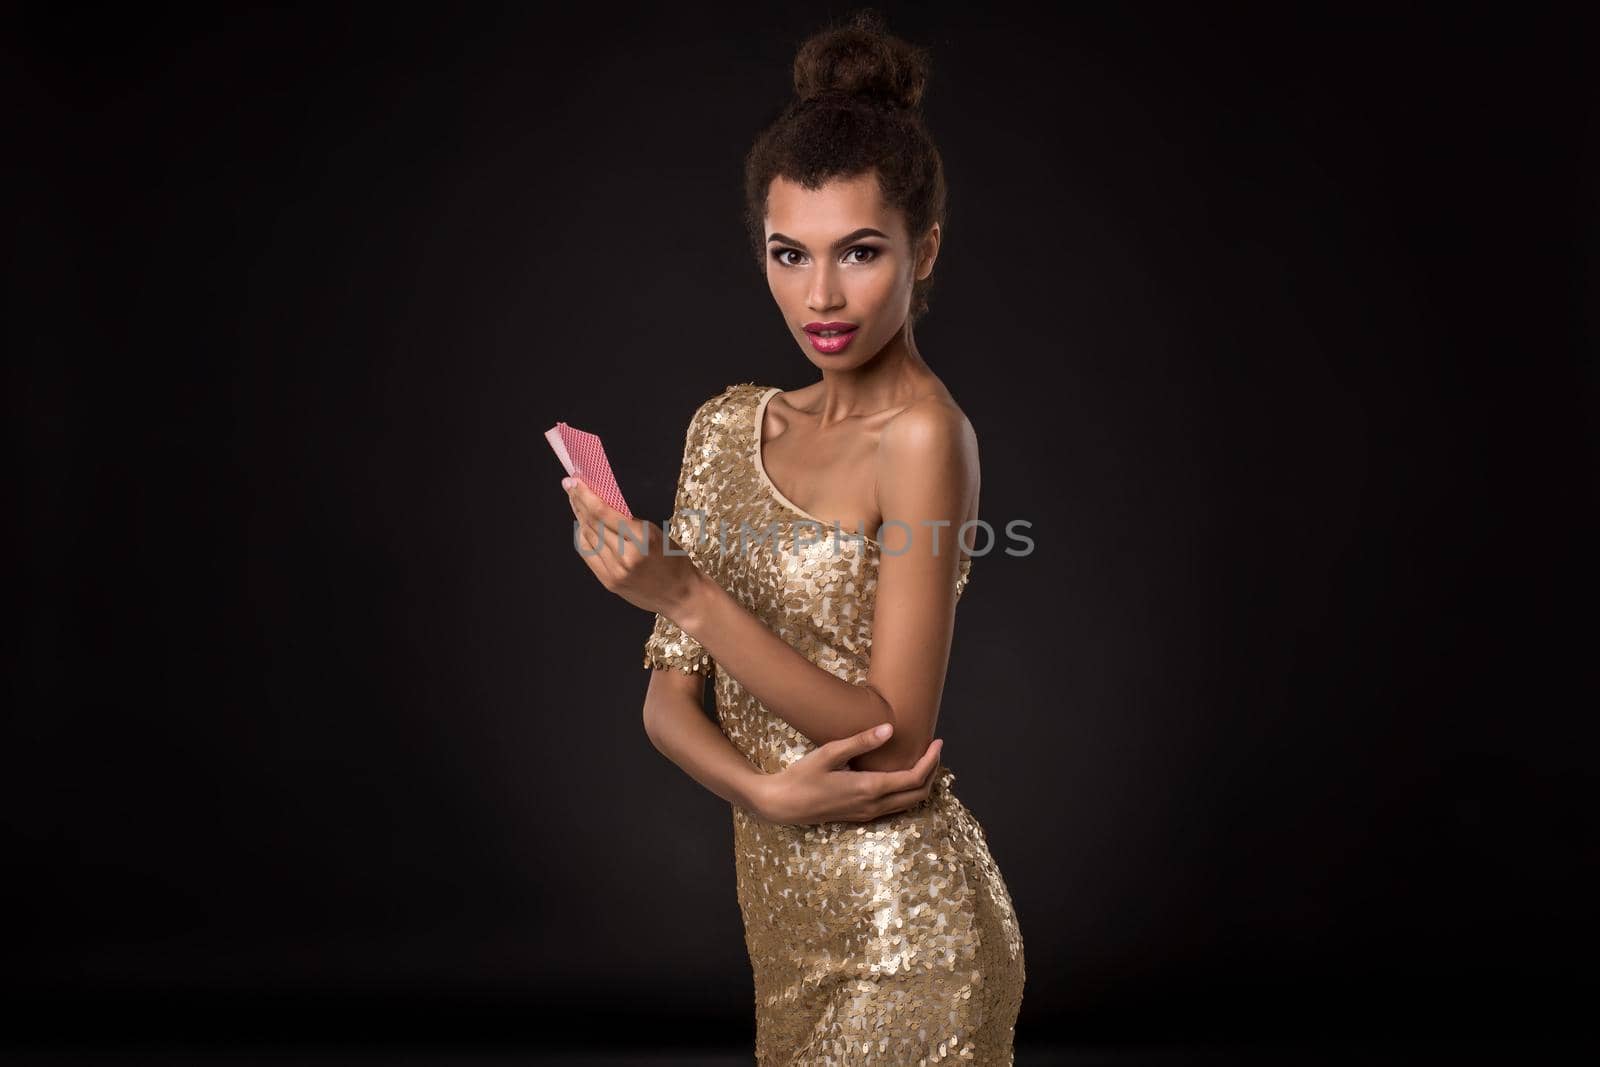 Woman winning - Young woman in a classy gold dress holding two cards, a poker of aces card combination. Emotions by nazarovsergey